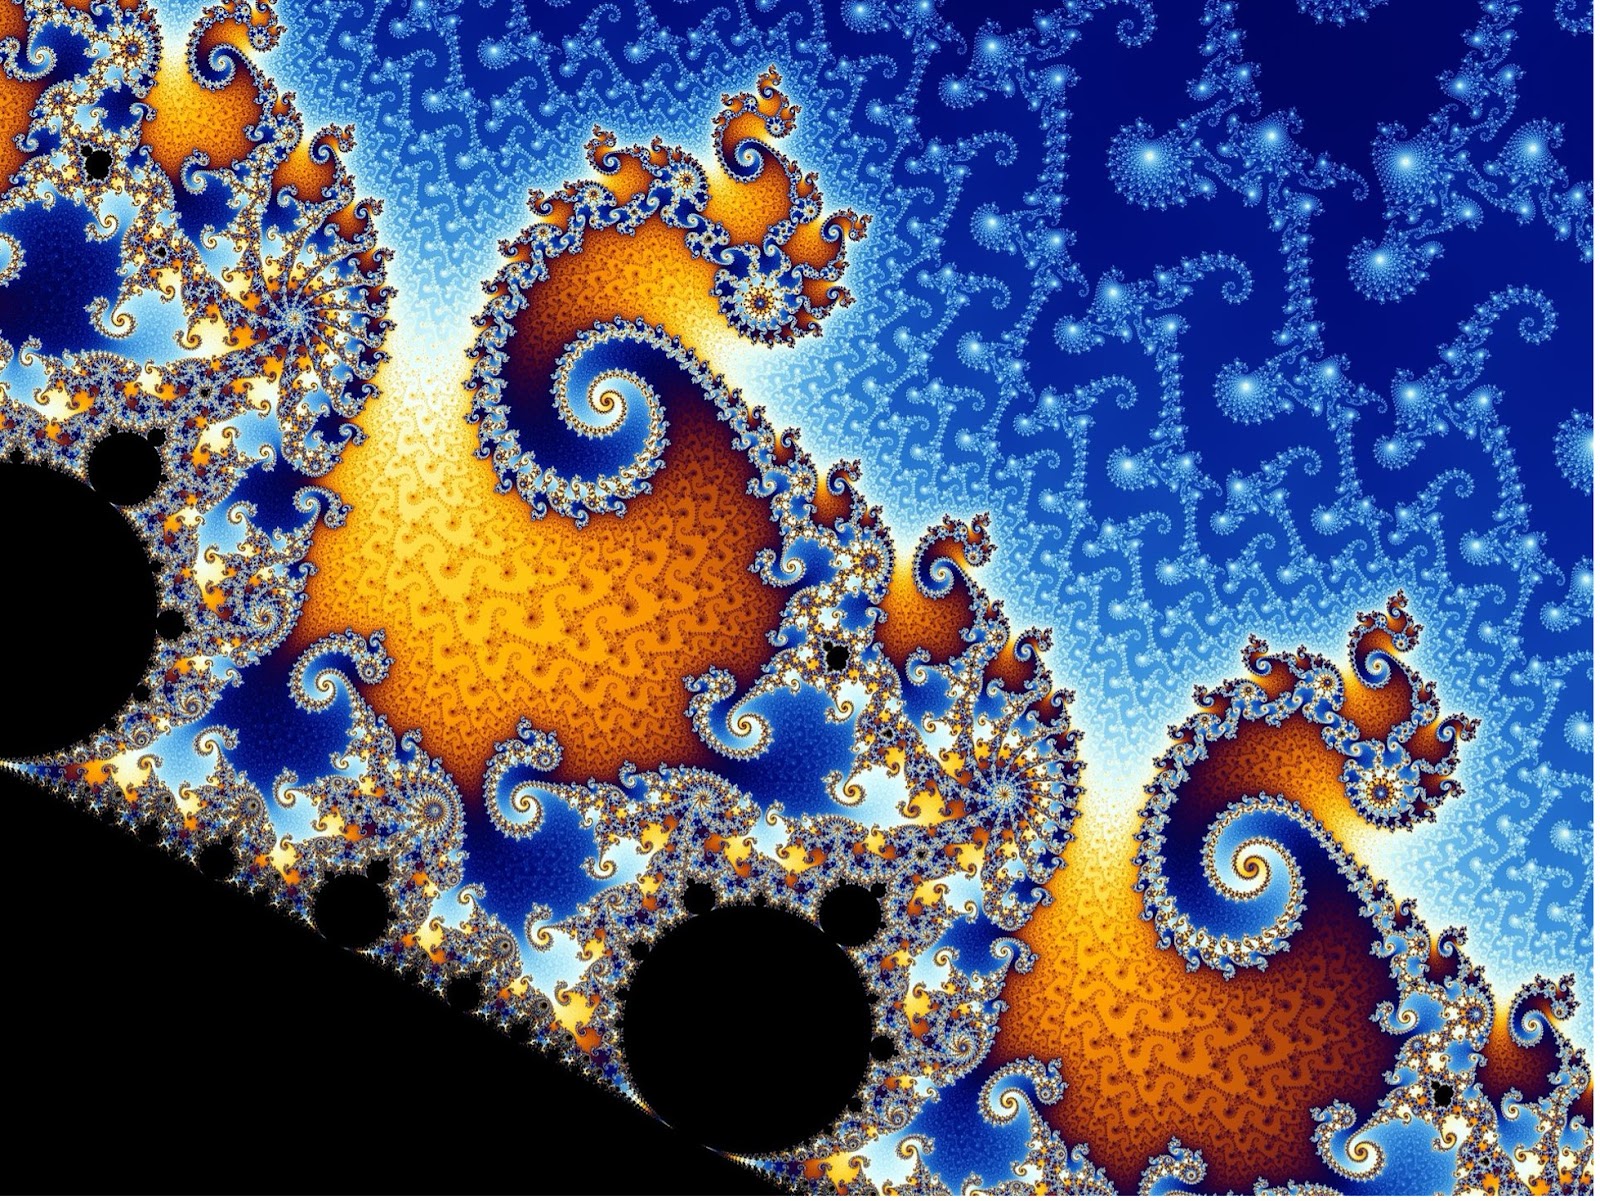 A zoomed-in portion of the Mandelbrot set